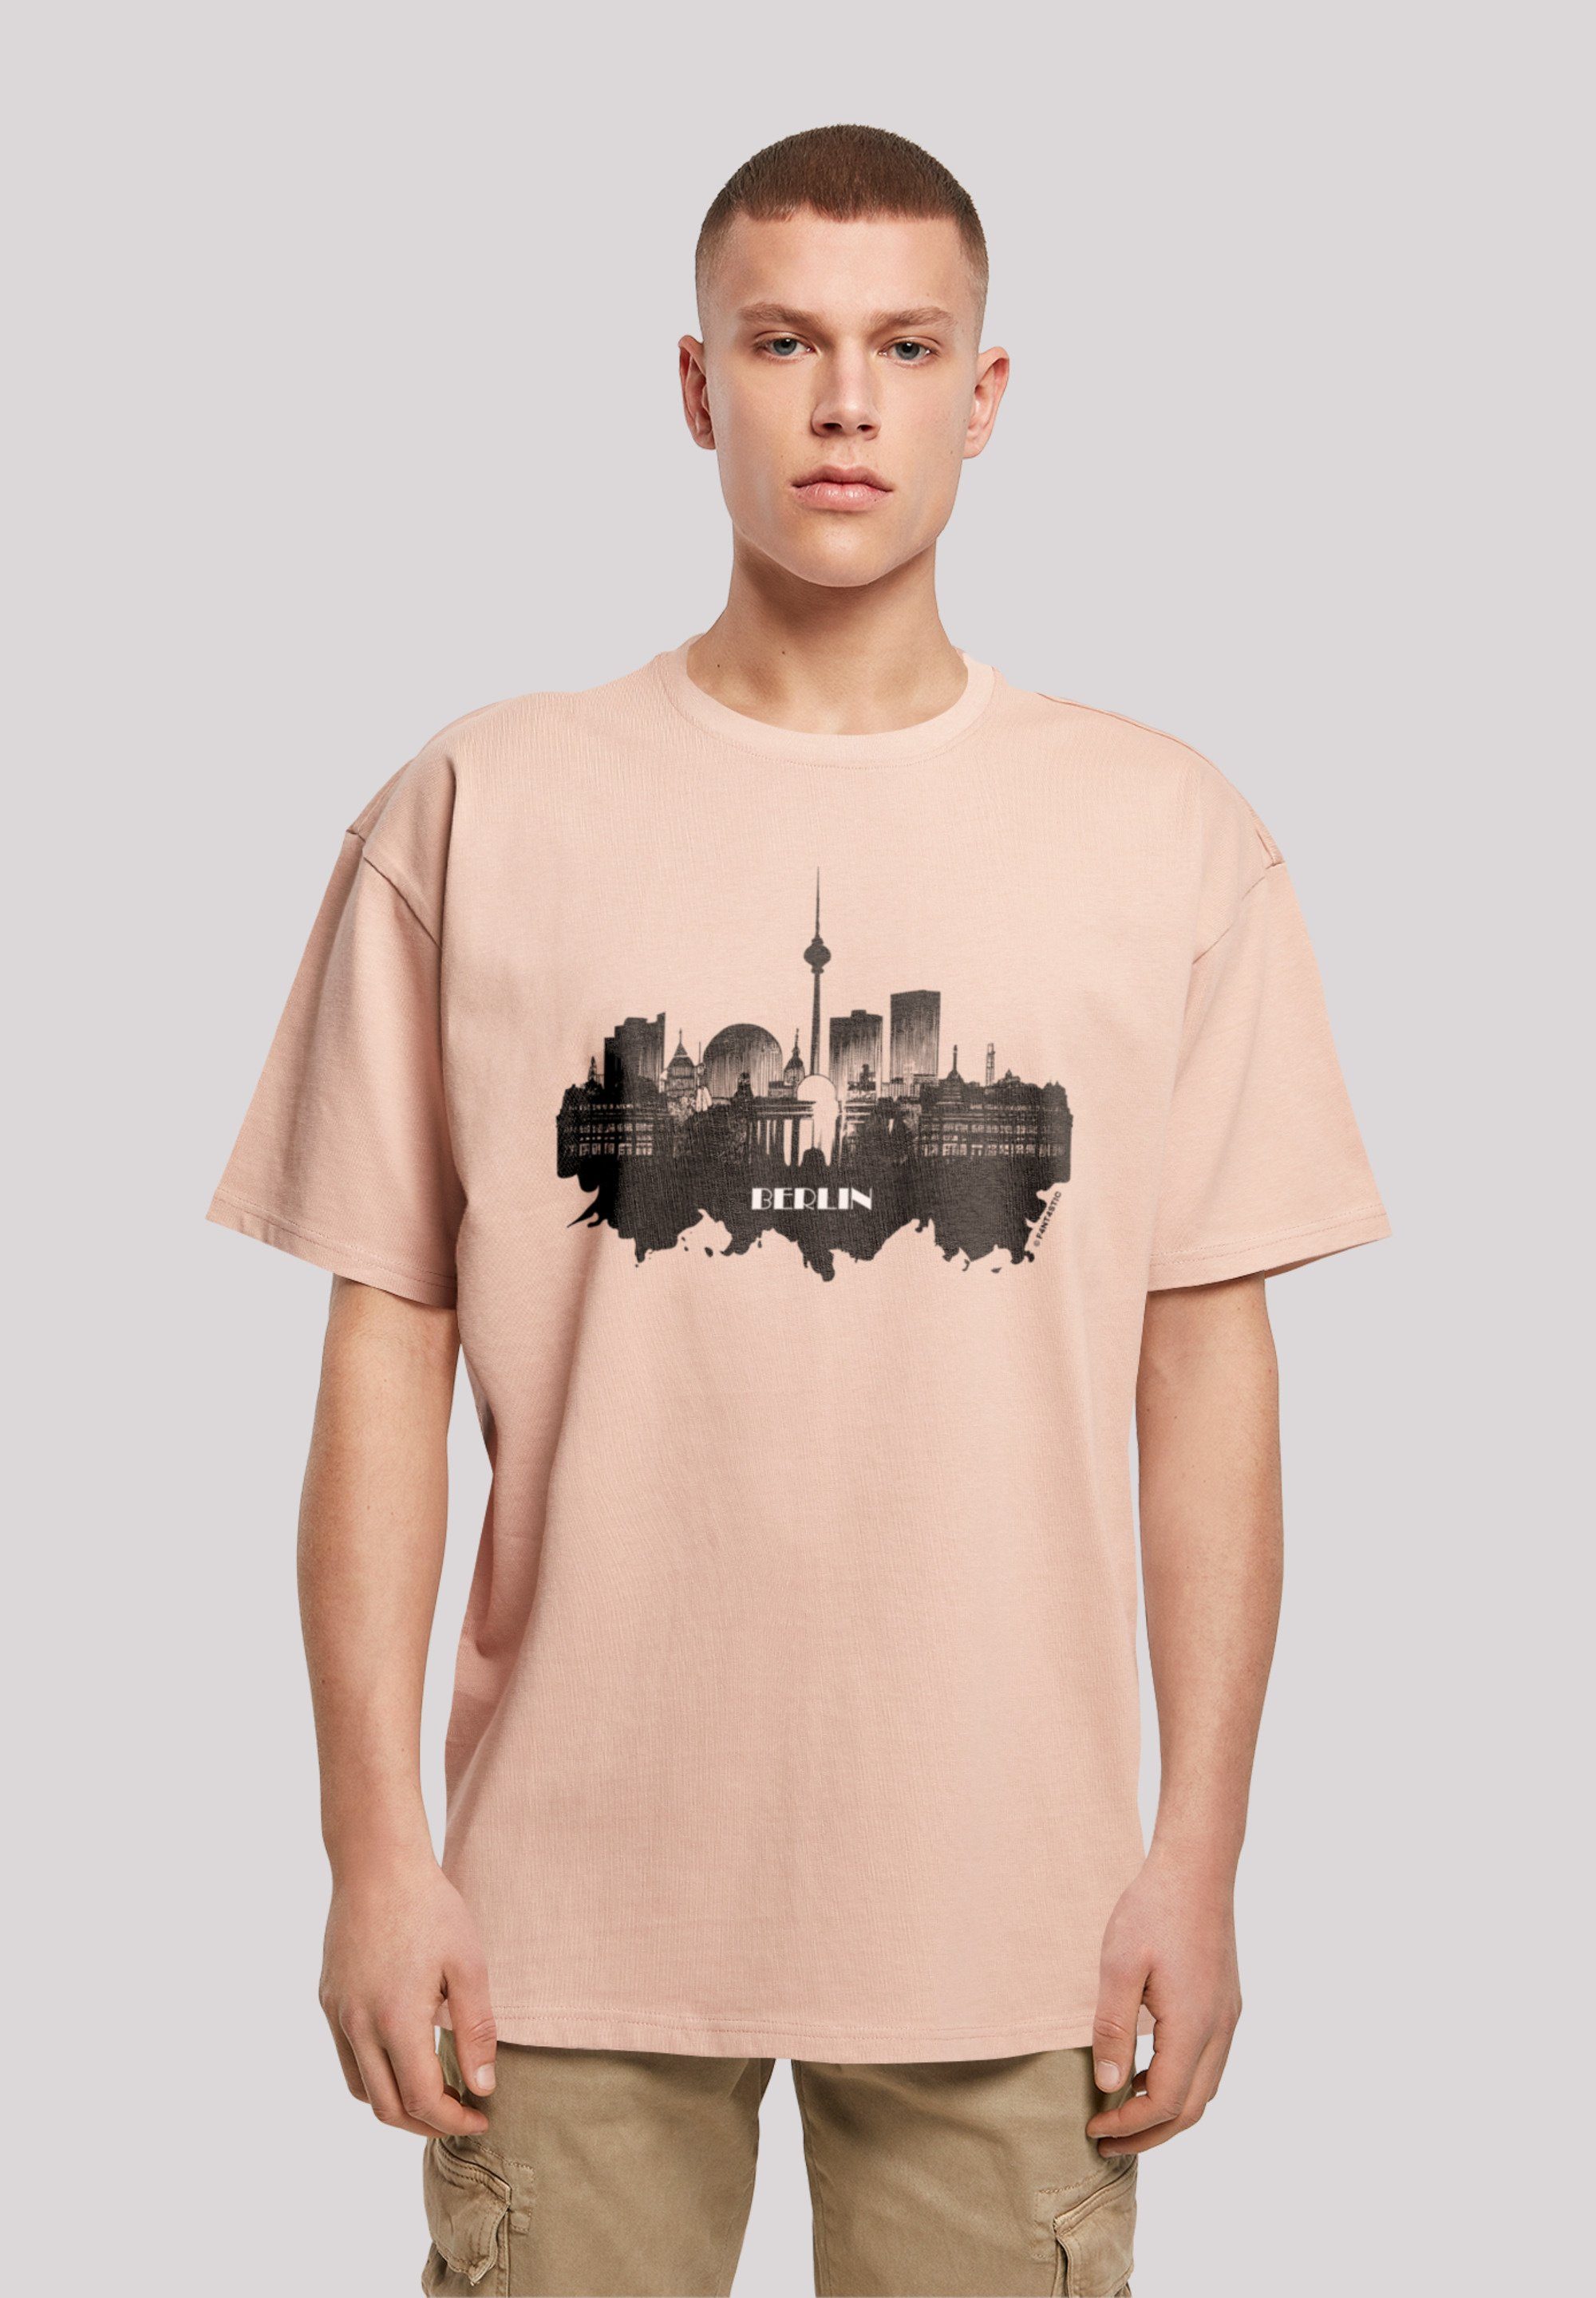 F4NT4STIC T-Shirt Cities Collection Berlin amber skyline - Print